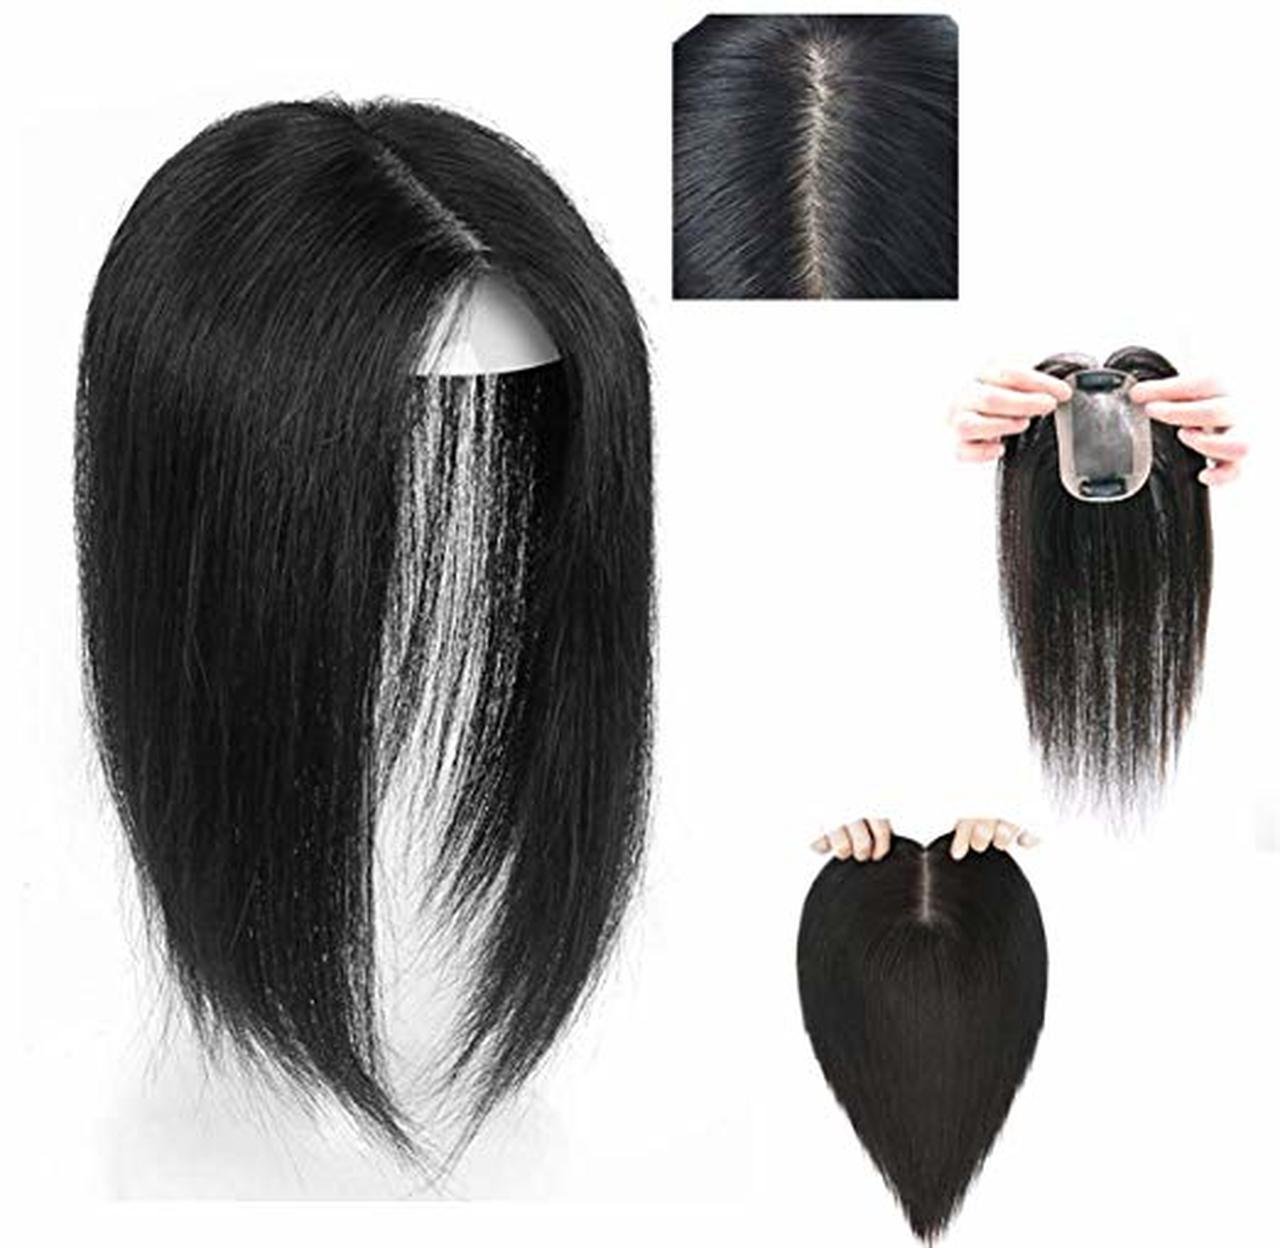 Al Human Hair Toppers Straight Hairpieces Clip In Top Crown Replacement Hair Extension For Cover White Loss Hair Free Part Toupee 2